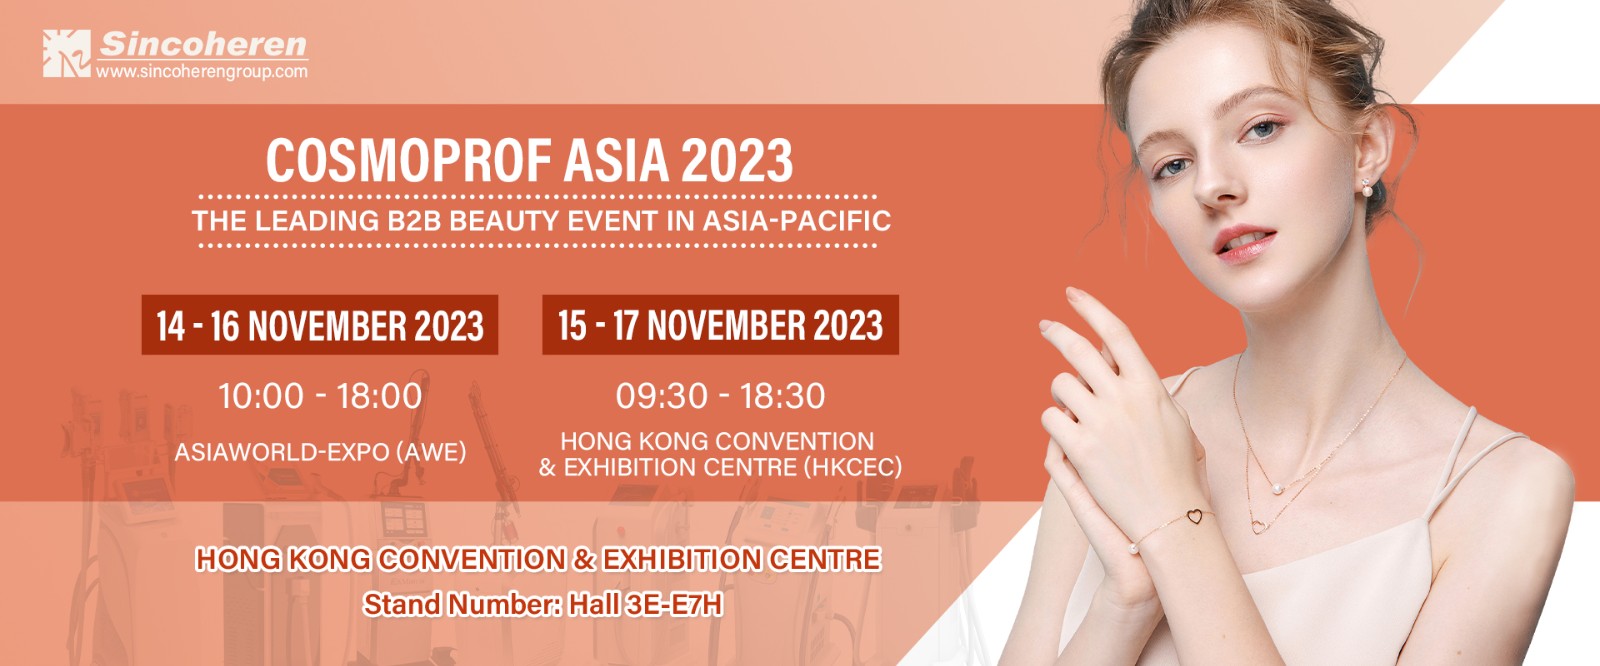 Sincoheren invite you to attend the beauty exhibition of Cosmoprof Asia 2023